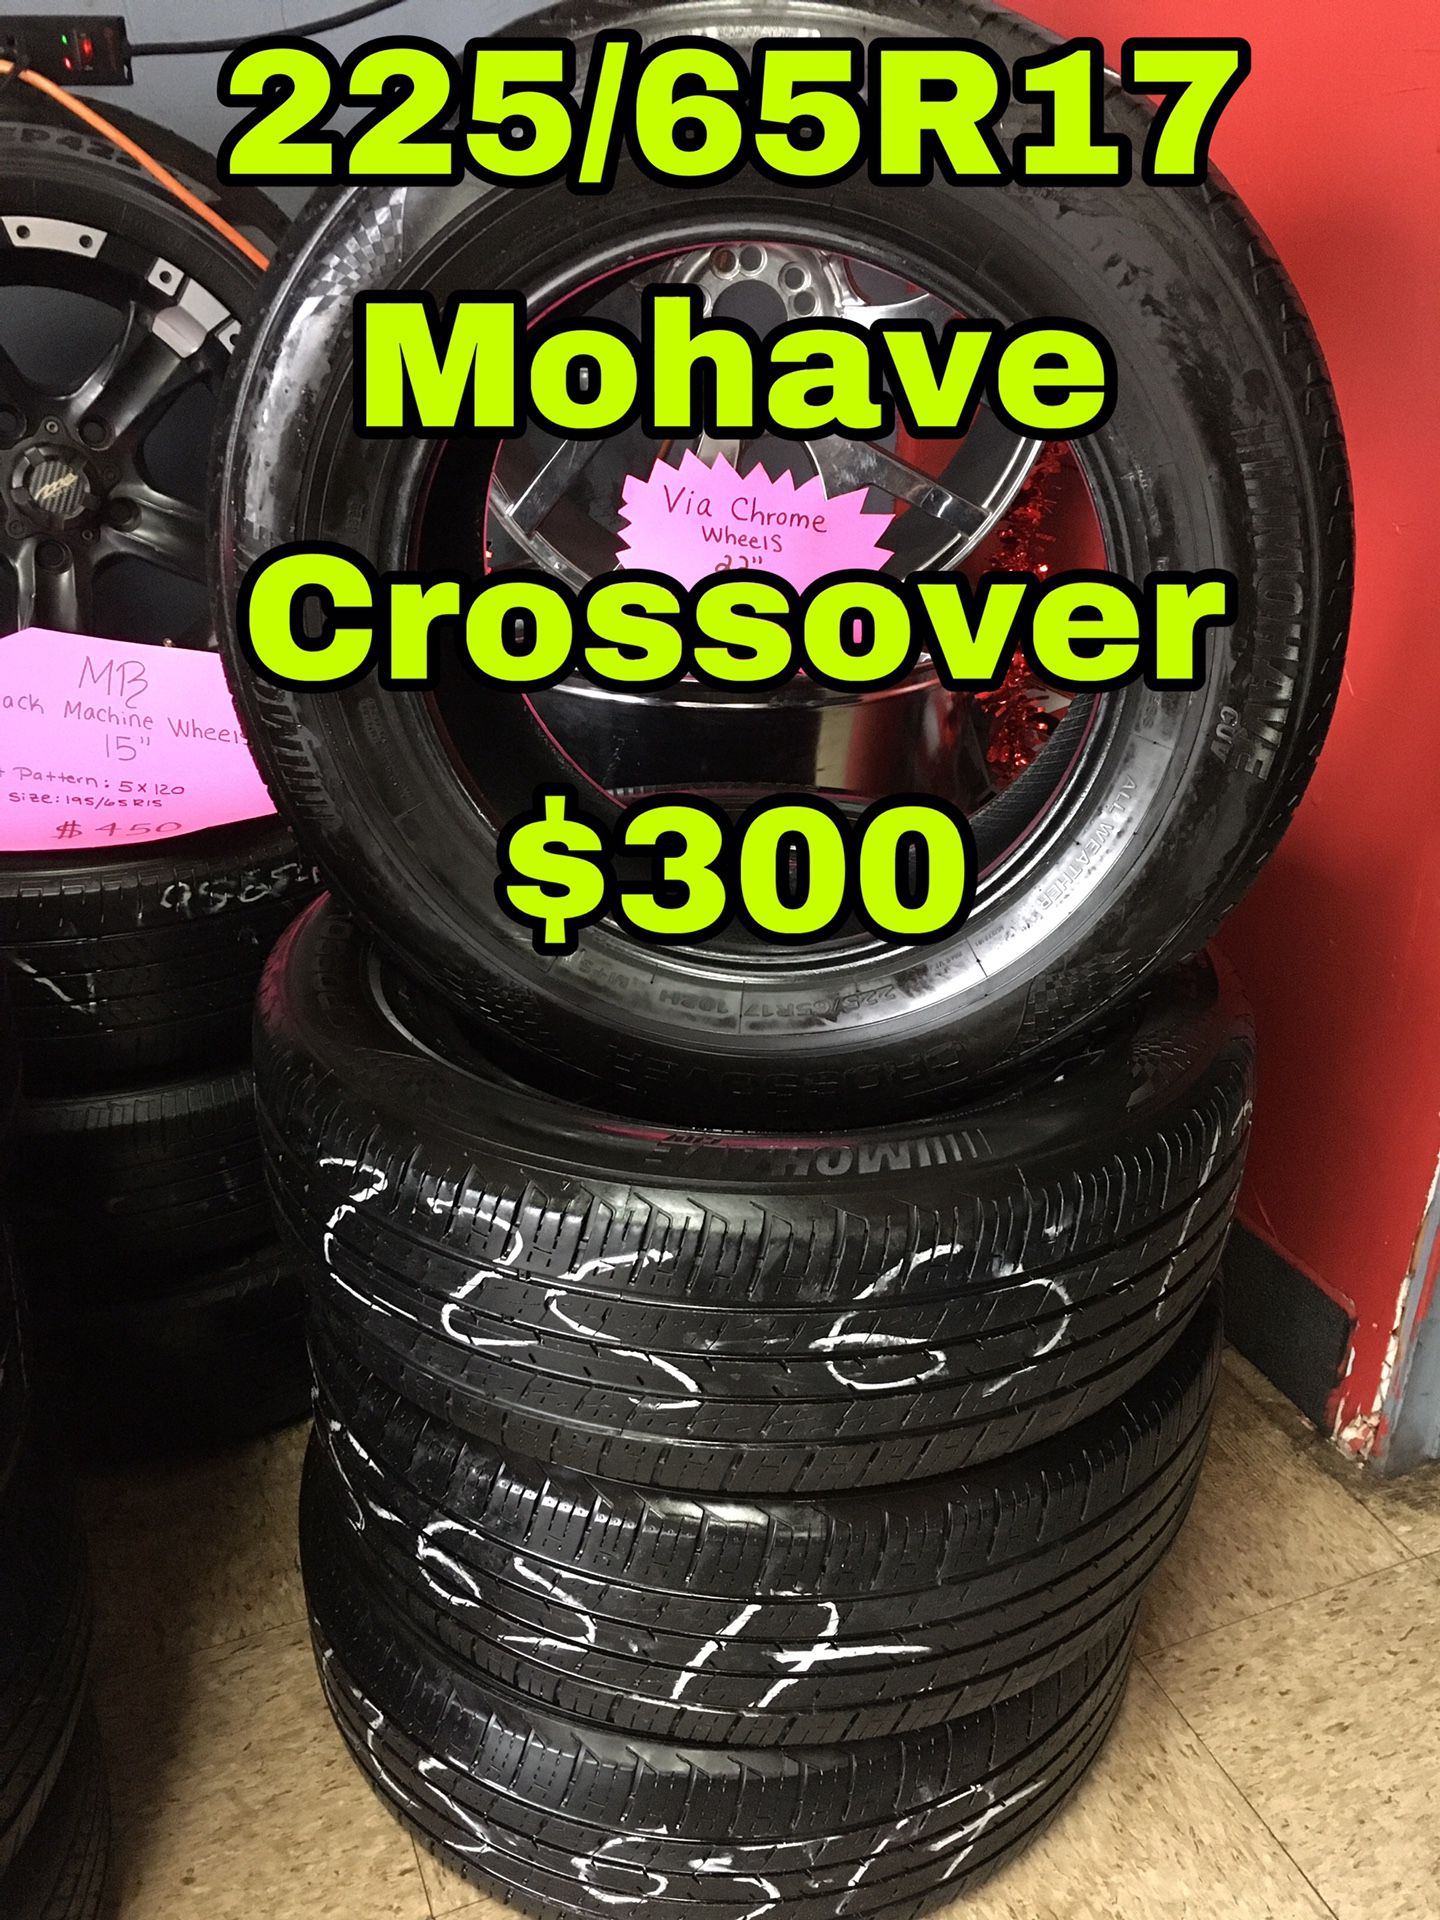 225/65R17 Mohave Crossover 